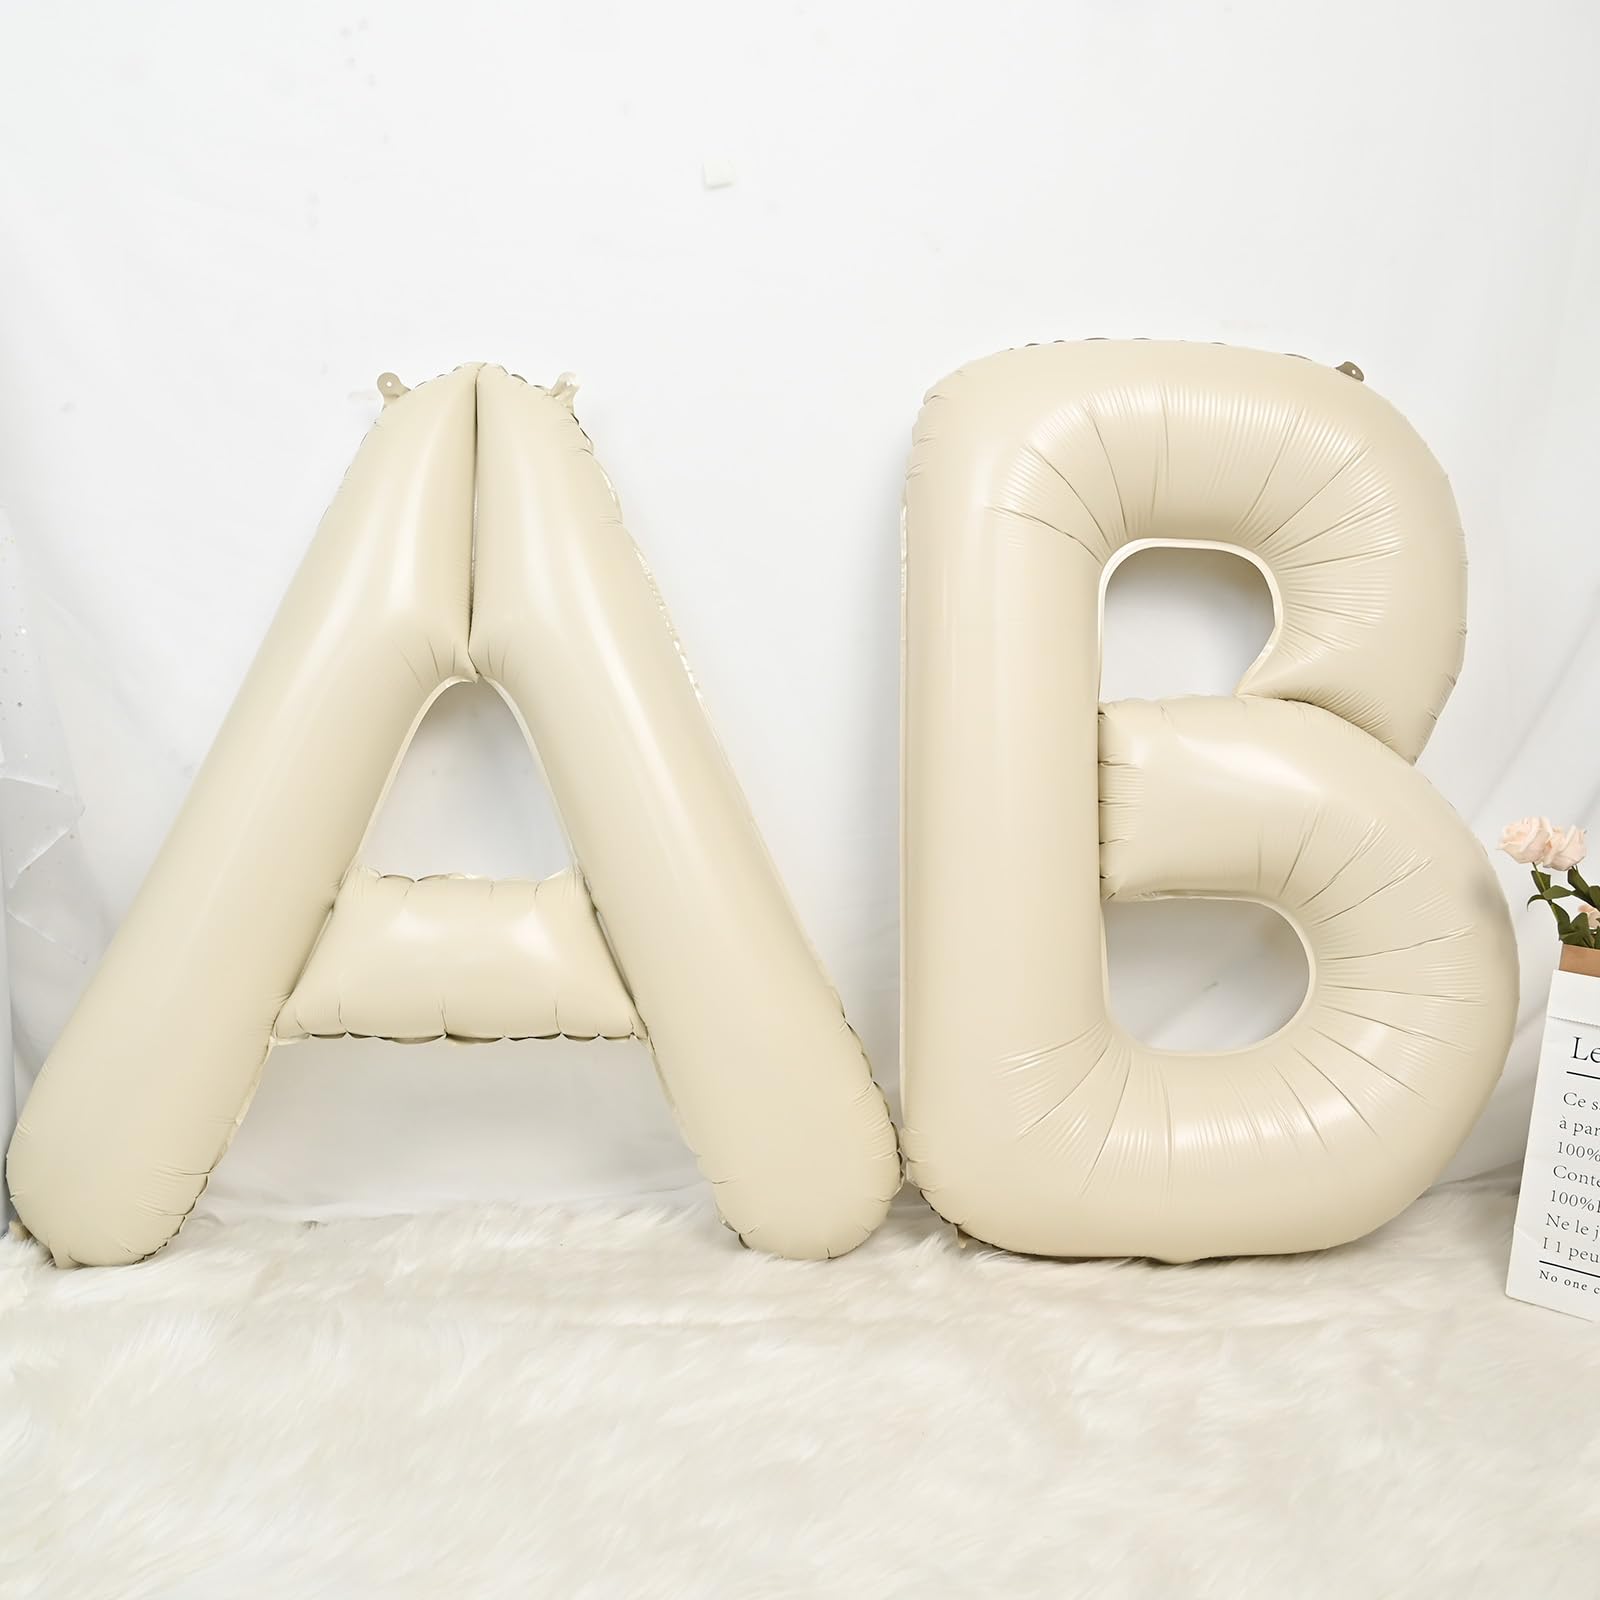 Letter Balloons Beige,40 Inch Letter E Balloons,A-Z Alphabet Name Foil Balloons,Big Single Cream Aluminum E Word Balloons Helium for Birthday,Anniversary,Baby Shower,Wedding Party Supplies Decorations